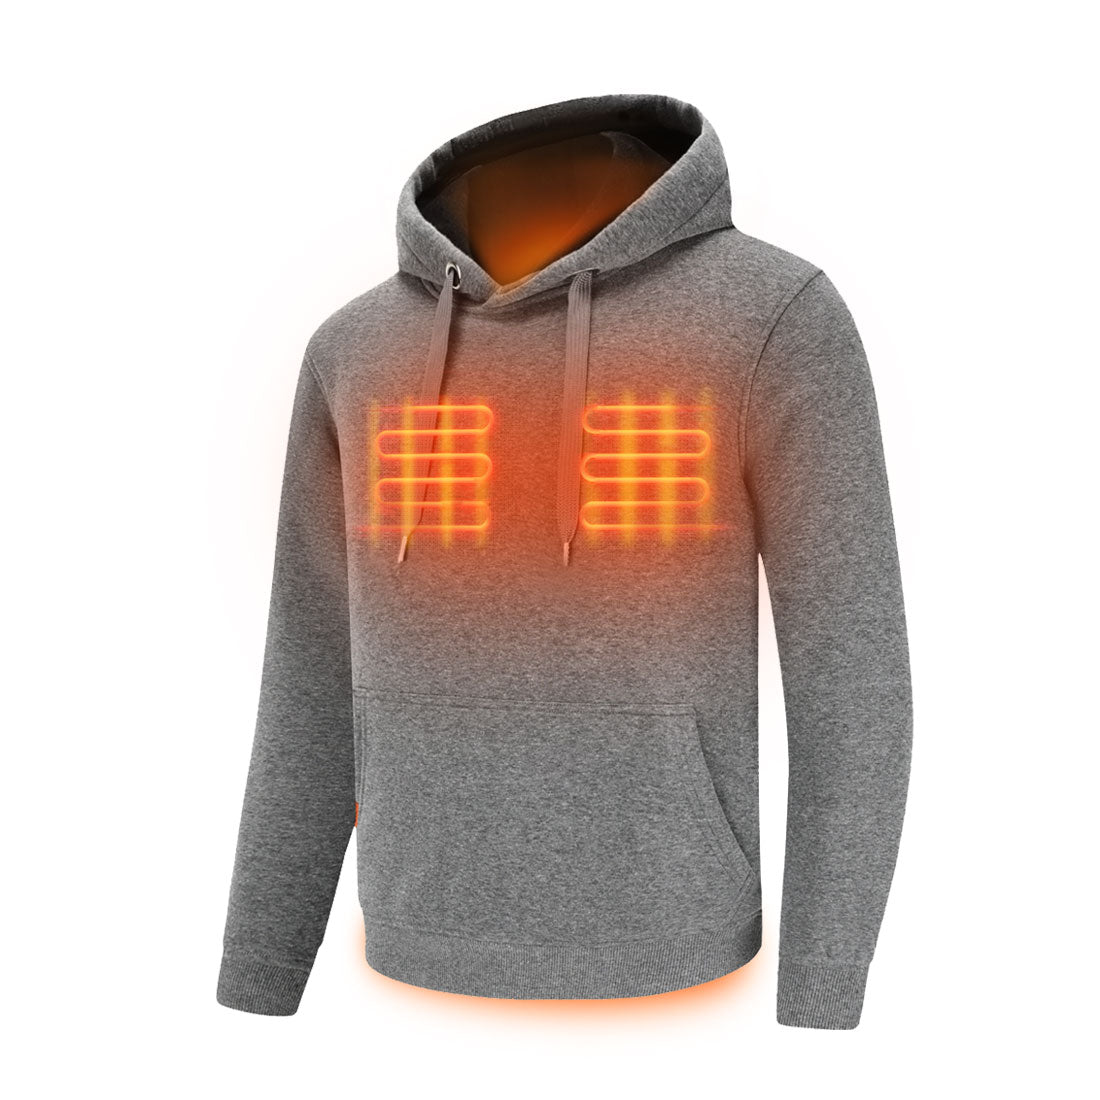 Next-Level™ Heated Comfy Hoodie